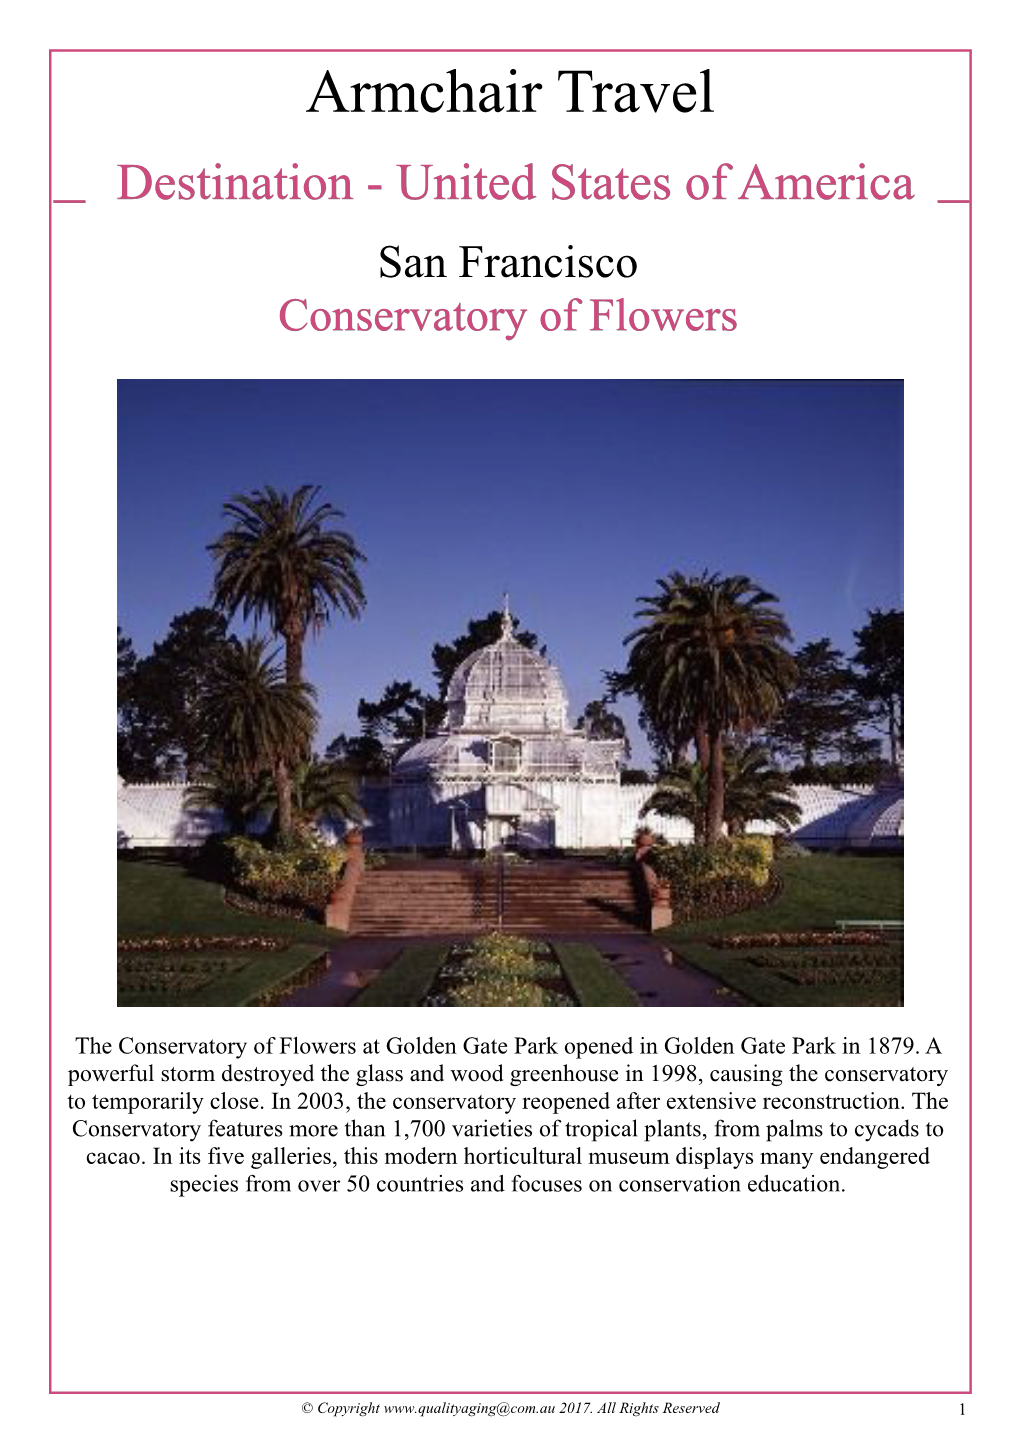 Armchair Travel Destination - United States of America San Francisco Conservatory of Flowers